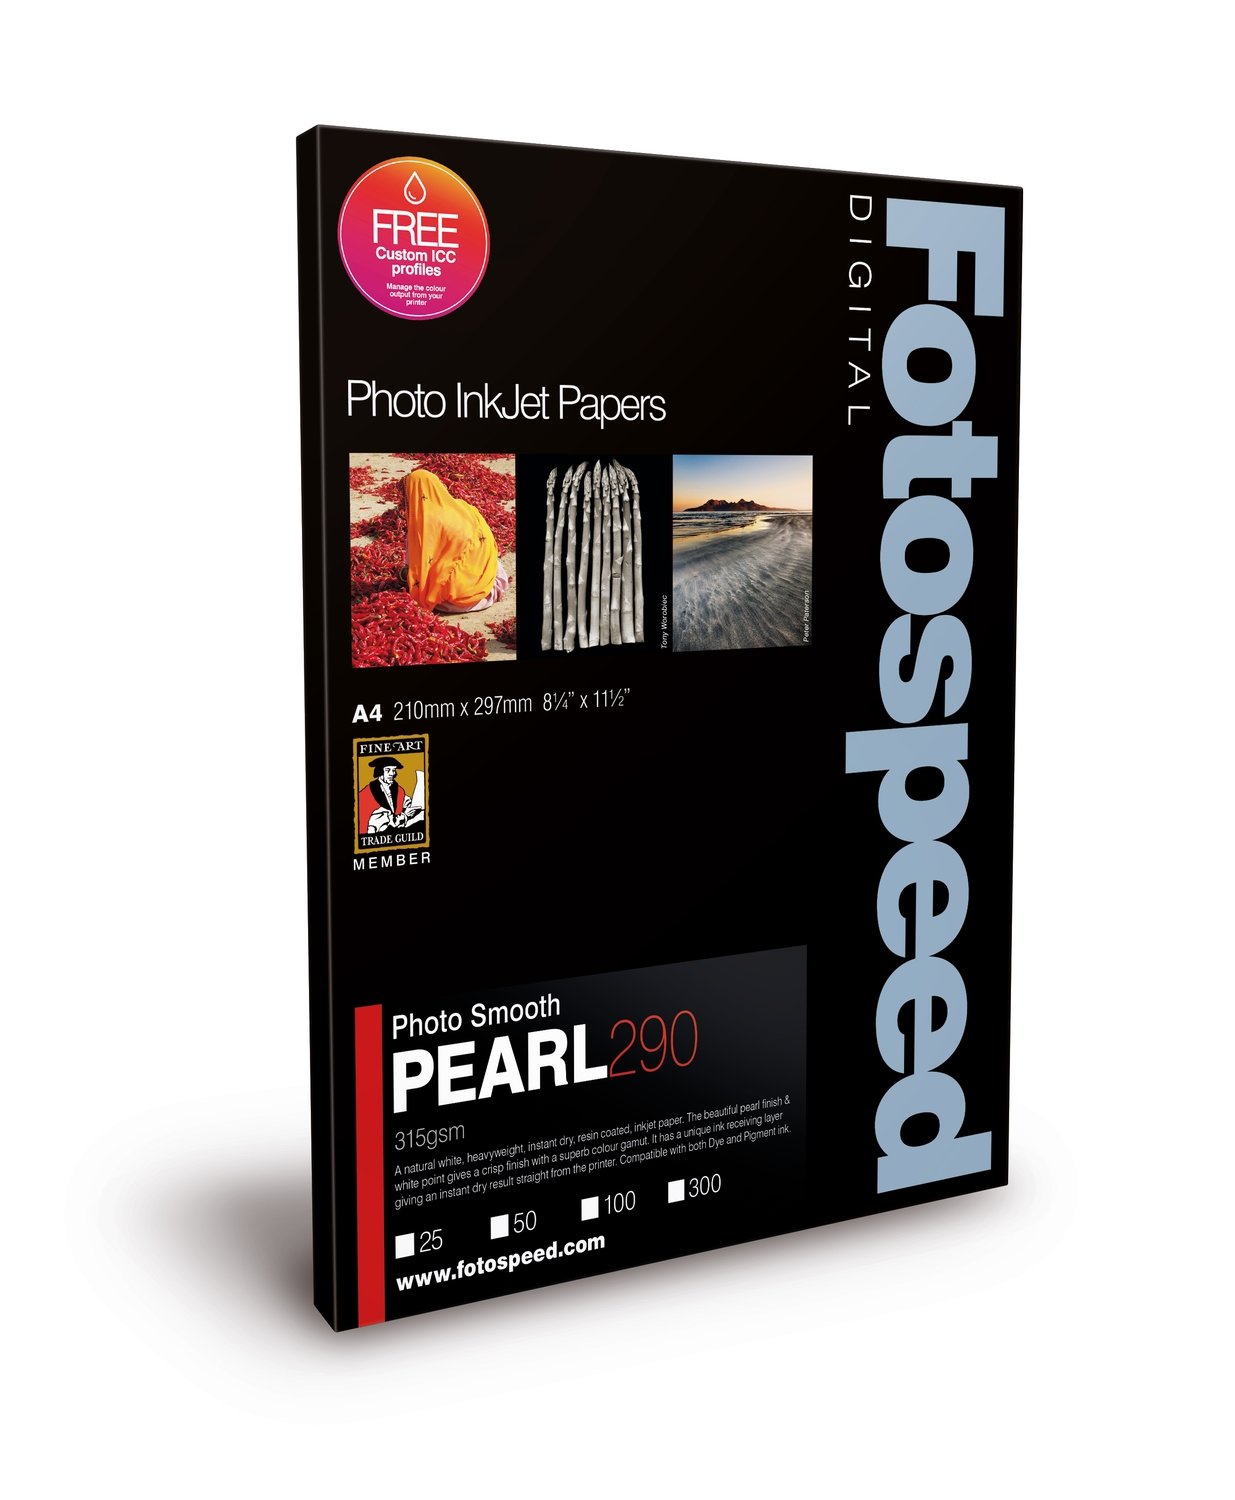 Fotospeed Photo Smooth Pearl 290 (A3+, 100 sheets) - 7D596